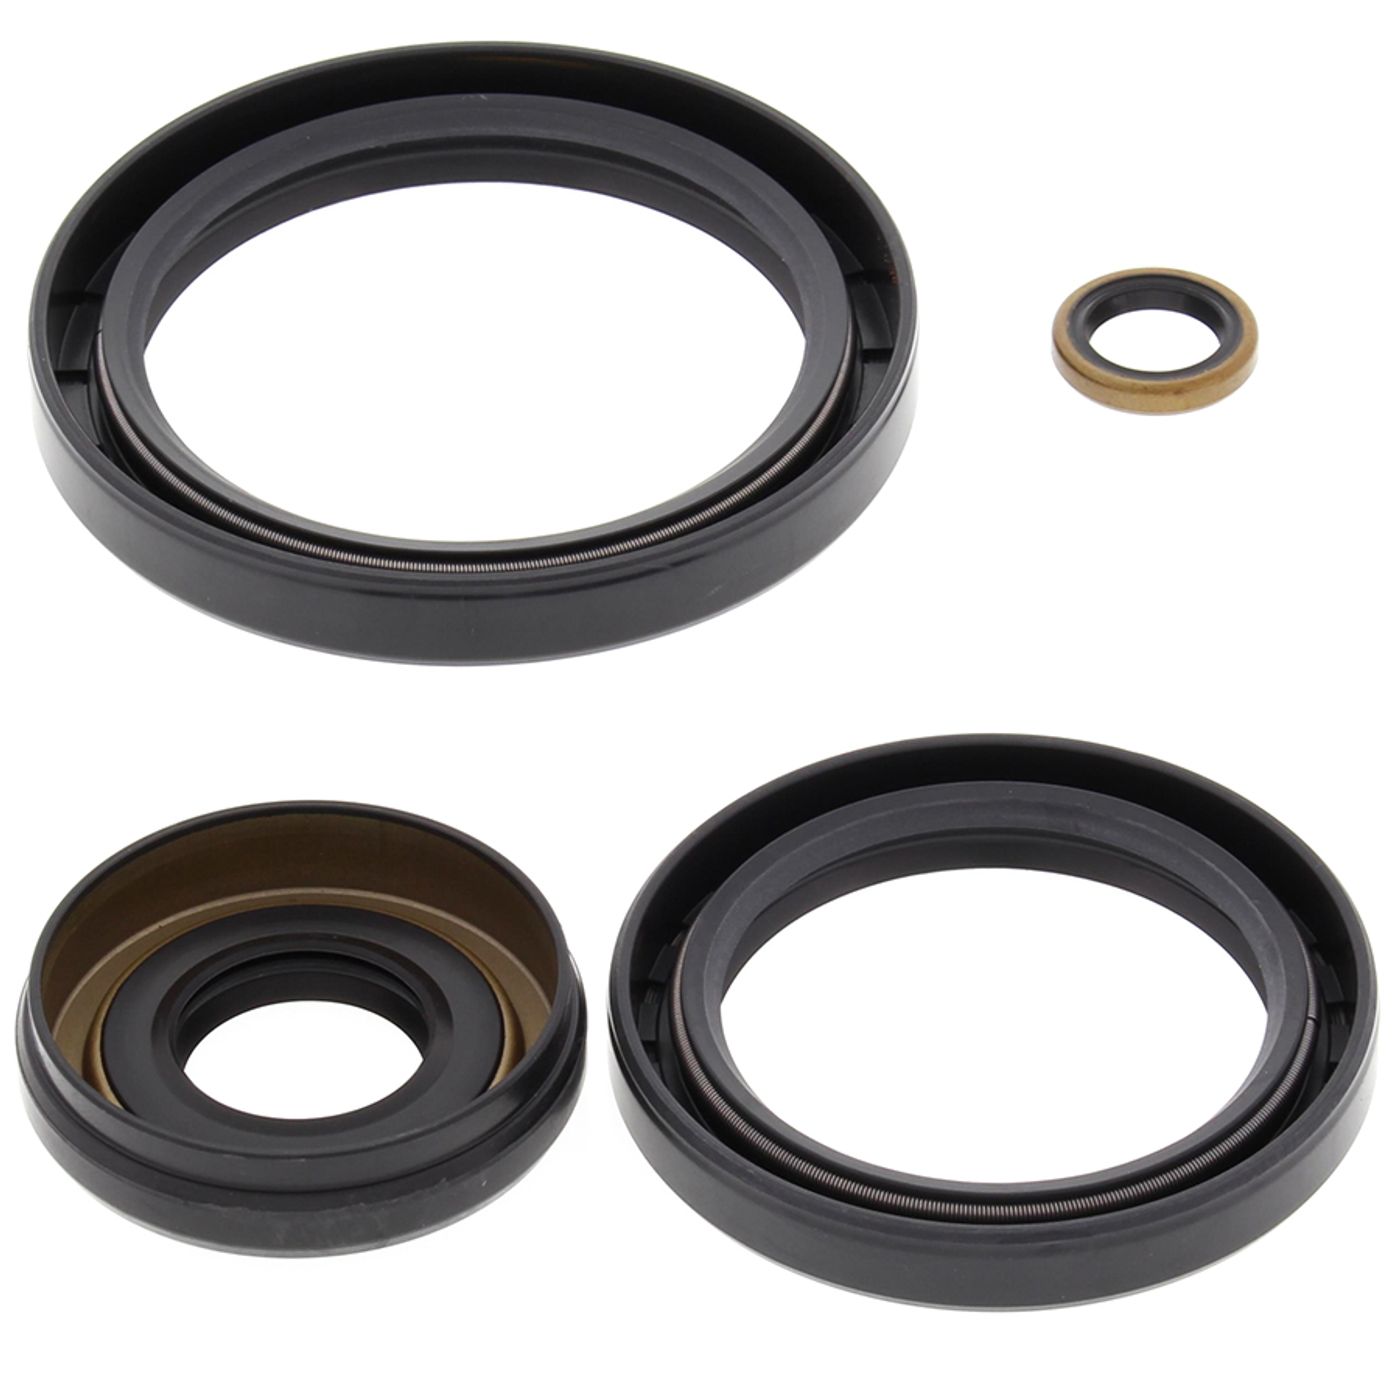 Wrp Diff Seal Kits - WRP252066-5 image